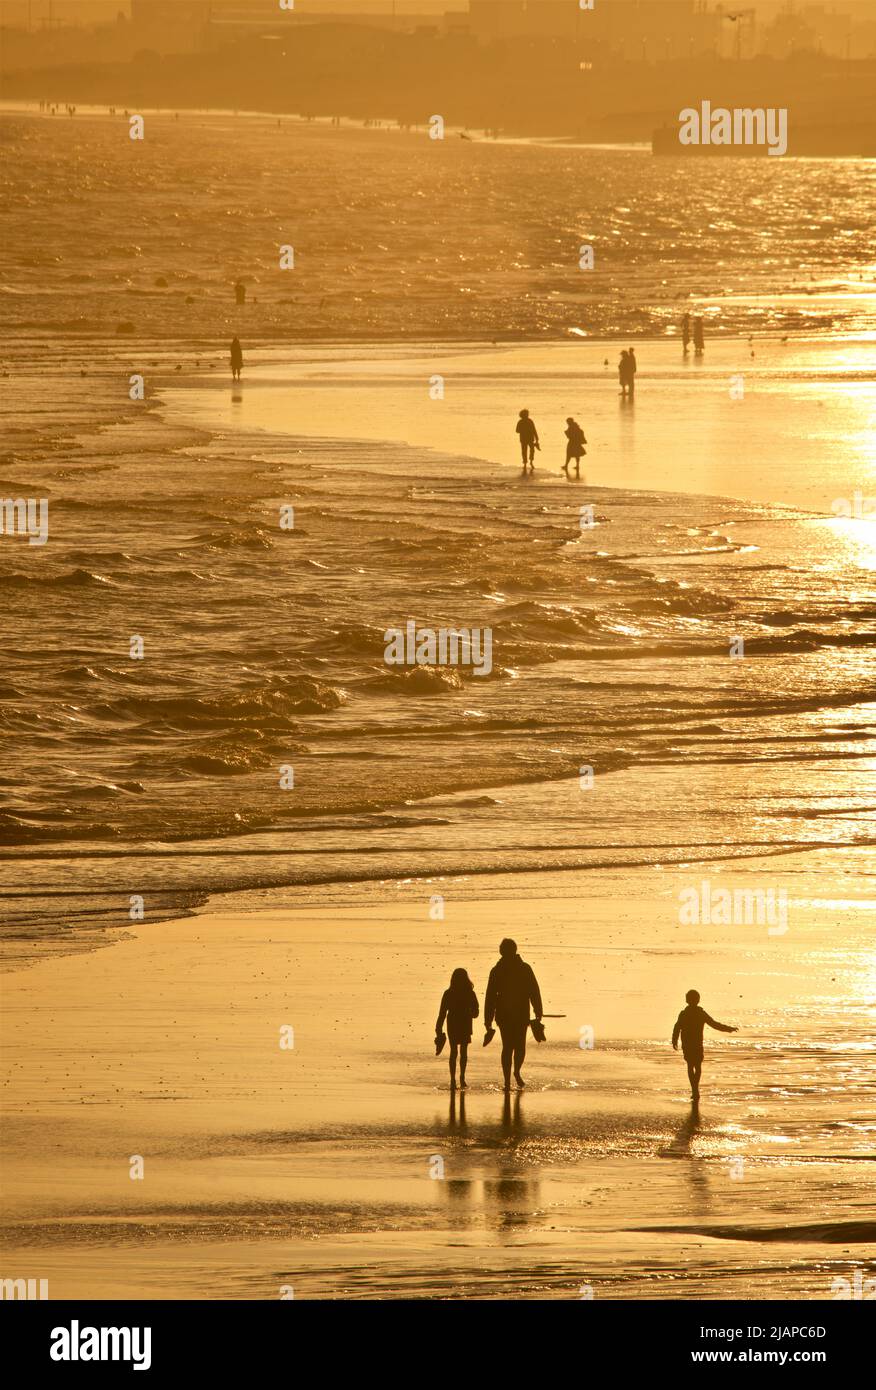 Silhouetted shapes of people walking on the exposed sand beach at low tide, Brighton & Hove, East Sussex, England, UK. Stock Photo